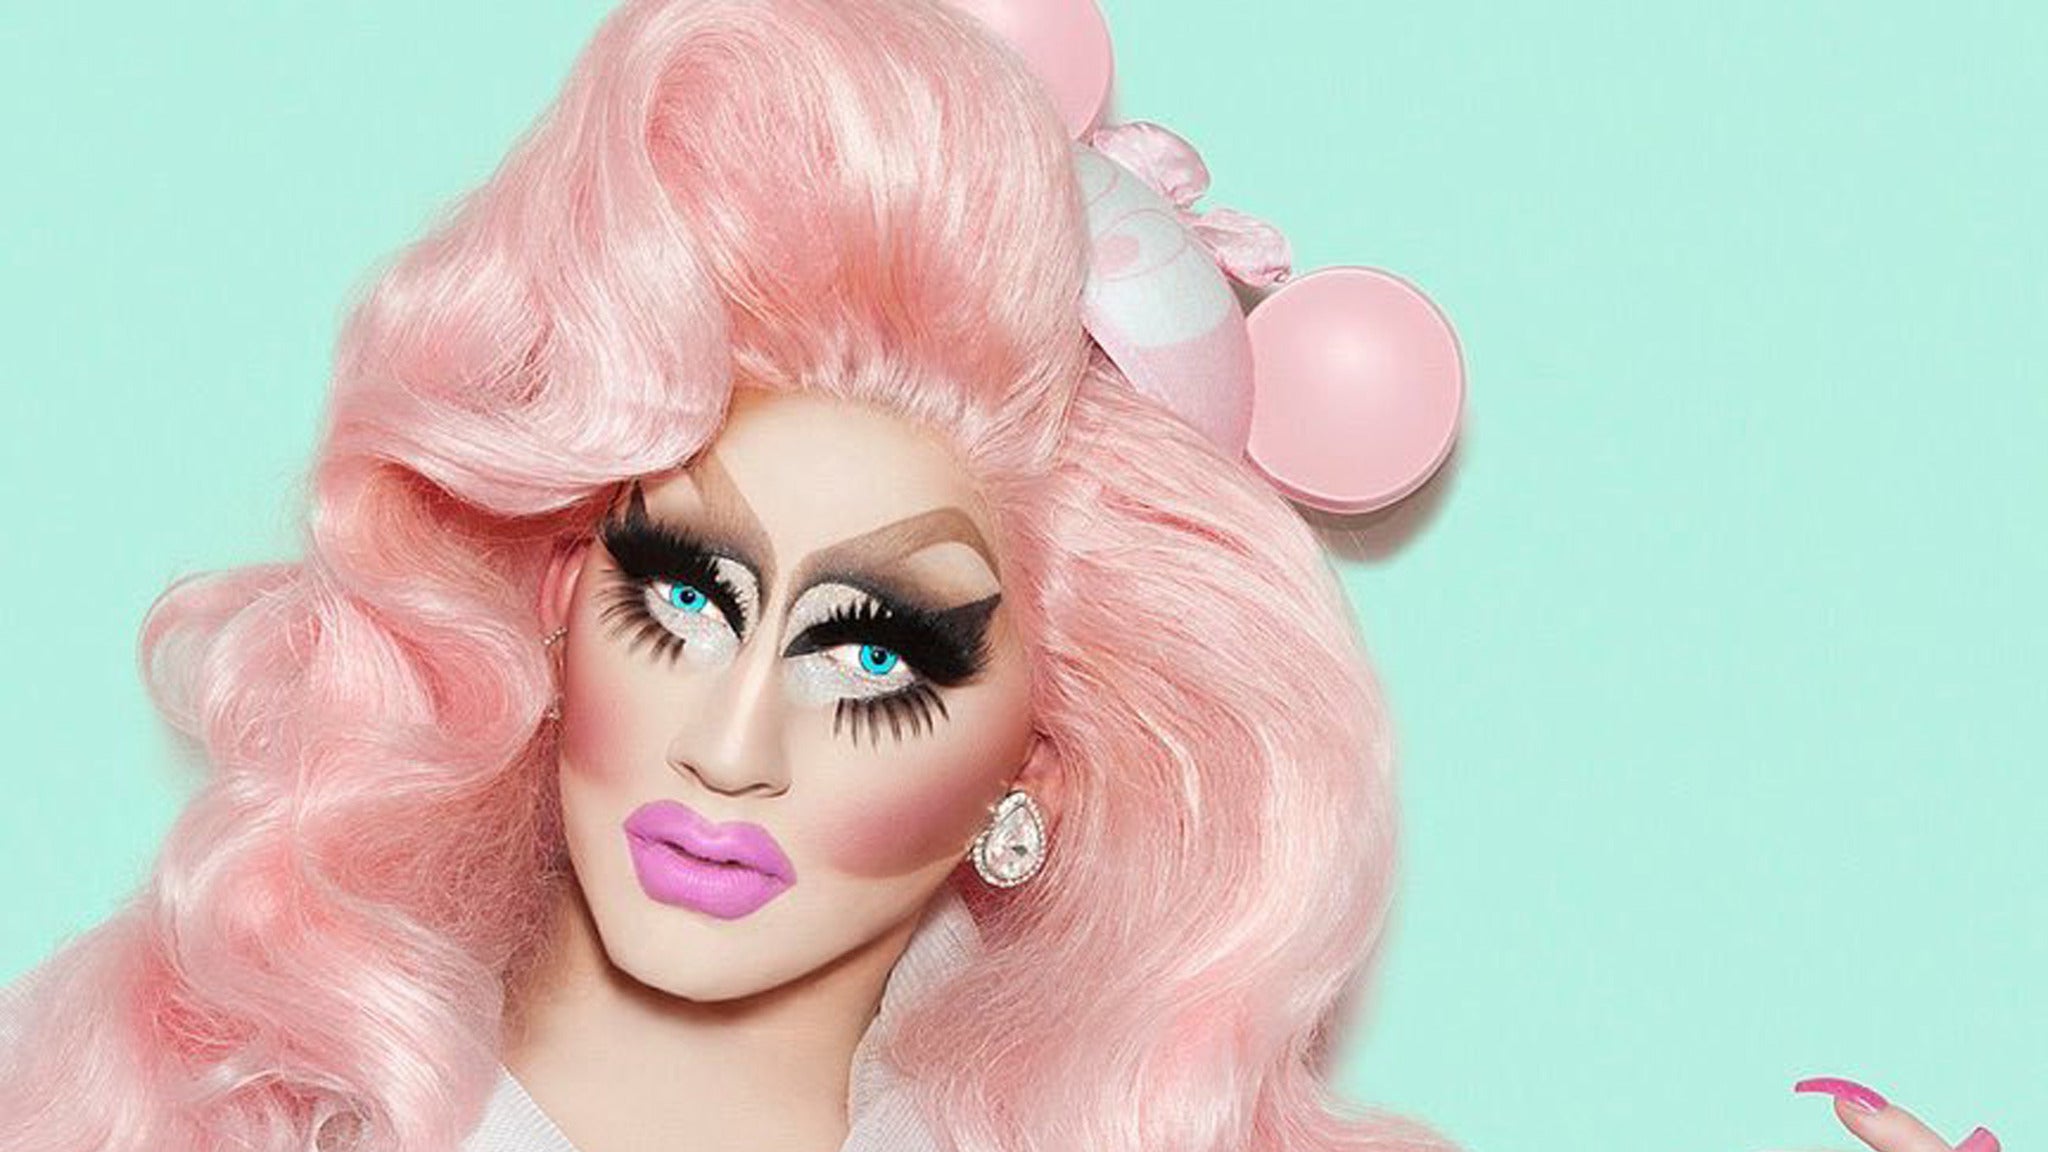 Trixie Mattel: Grown Up in Portland promo photo for Official Platinum presale offer code